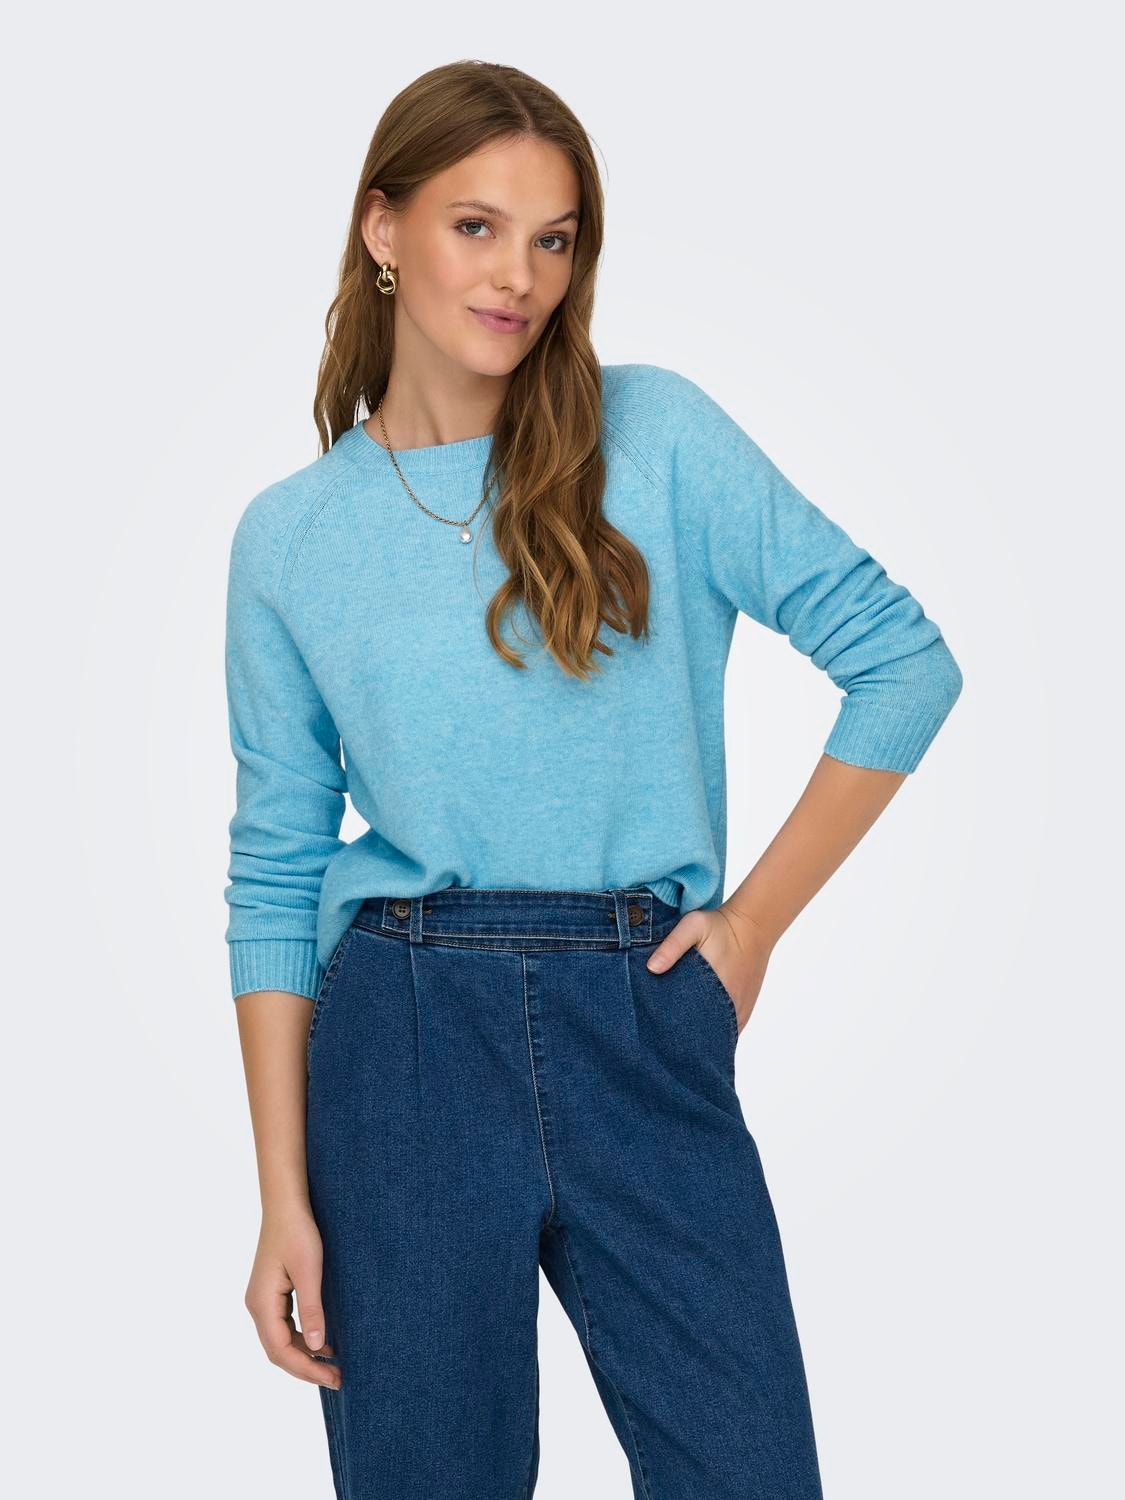 ONLY Solid colored Knitted Pullover -Aquarius - 15170427